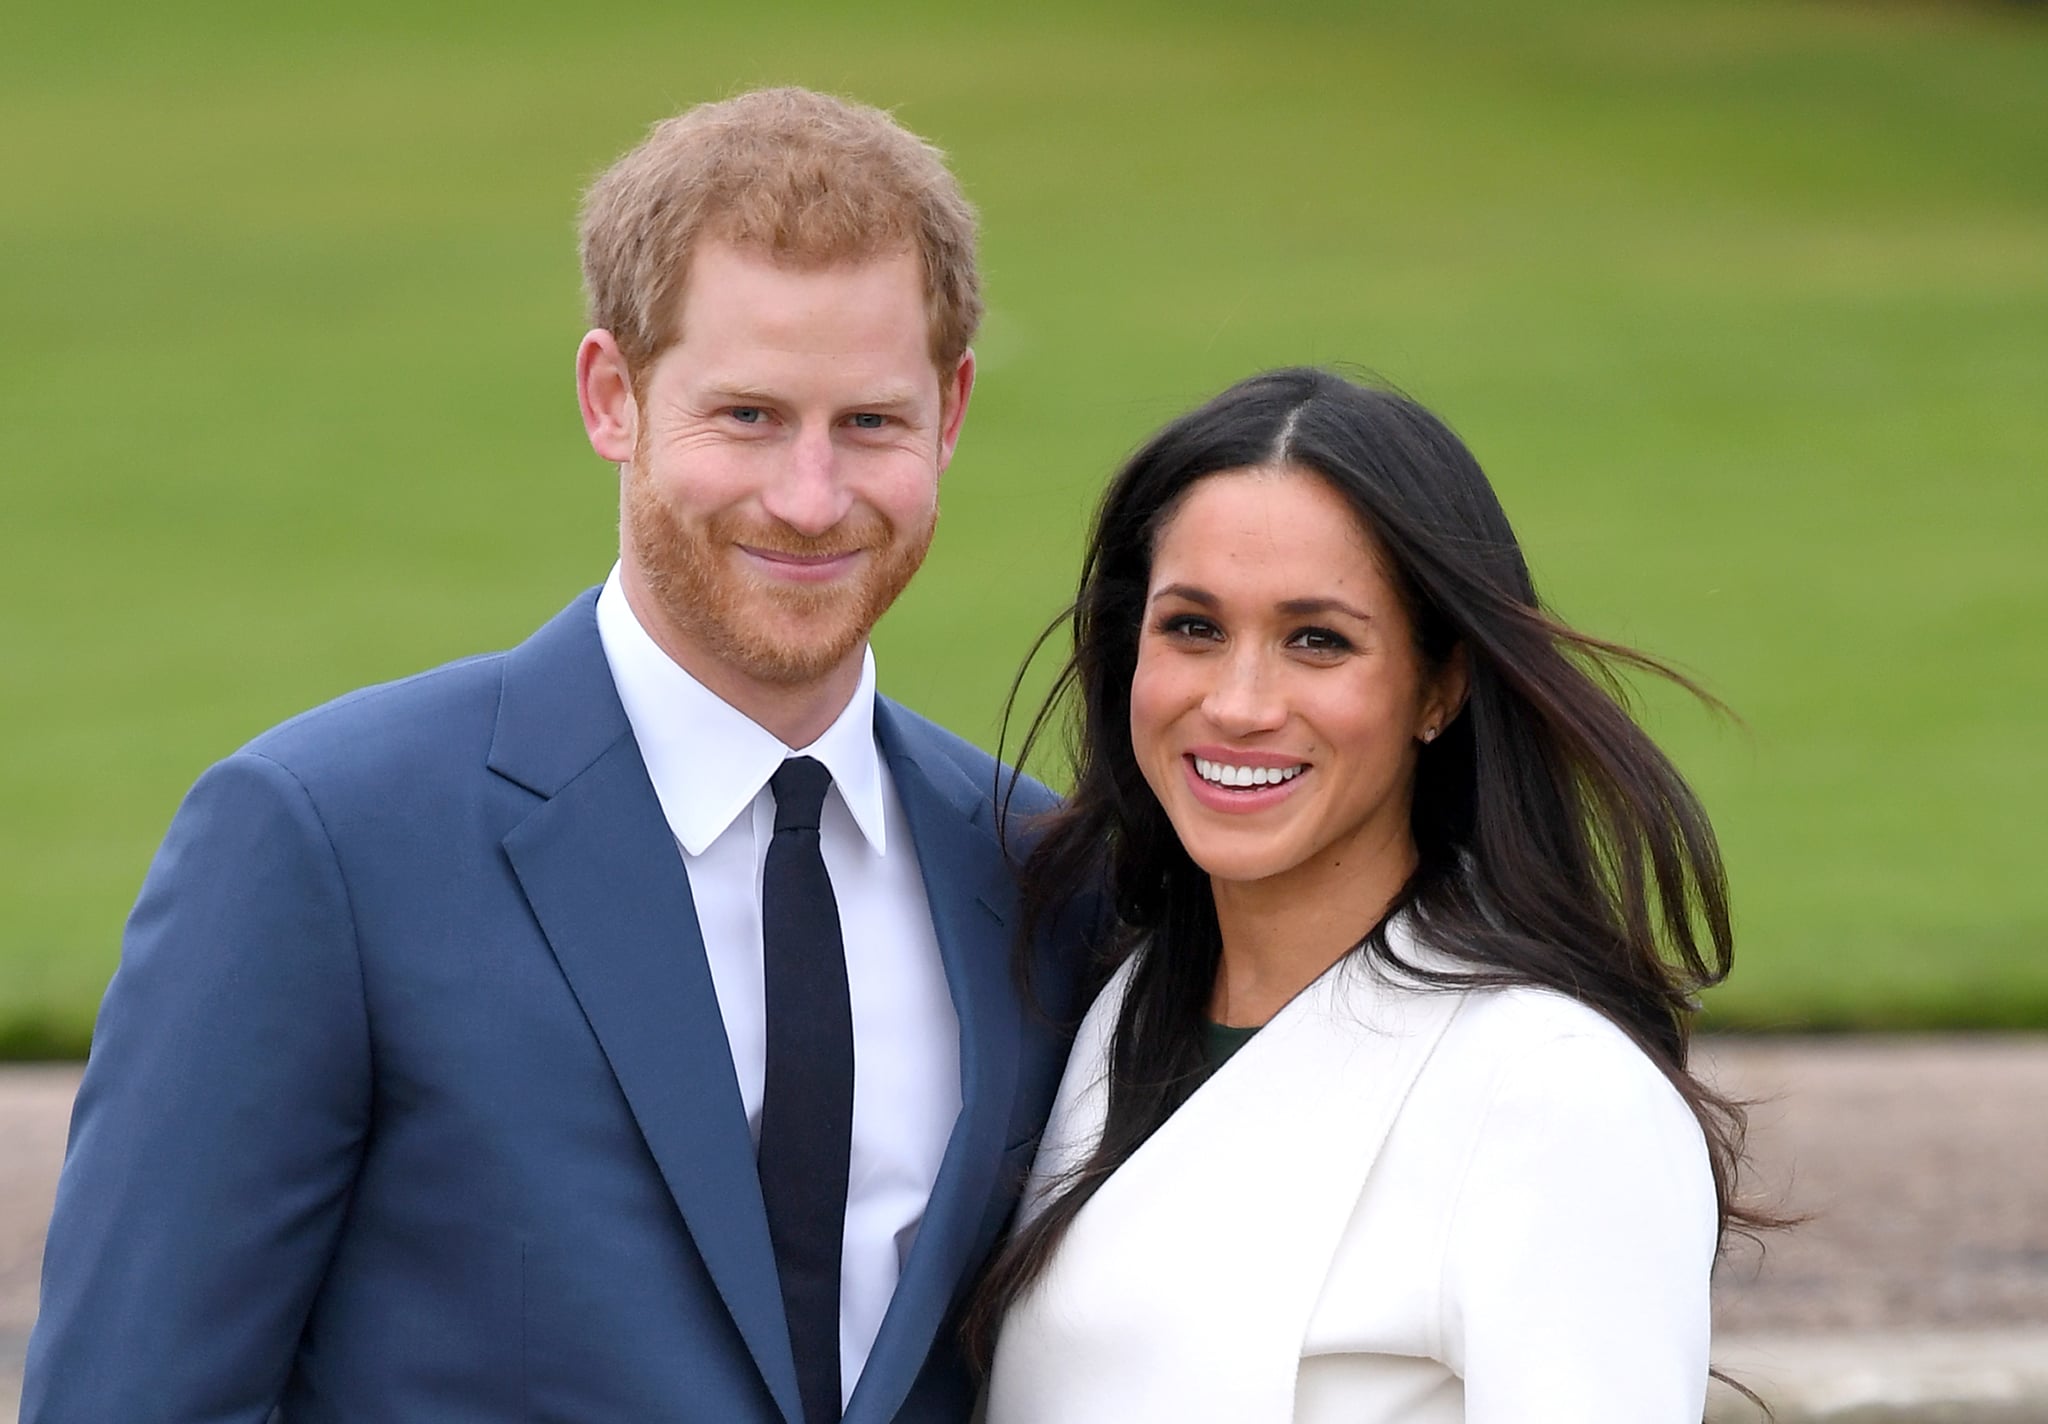 Prince Harry and Meghan Markle Just Inked a Major Deal With Netflix, and We’re Ready to Tune In